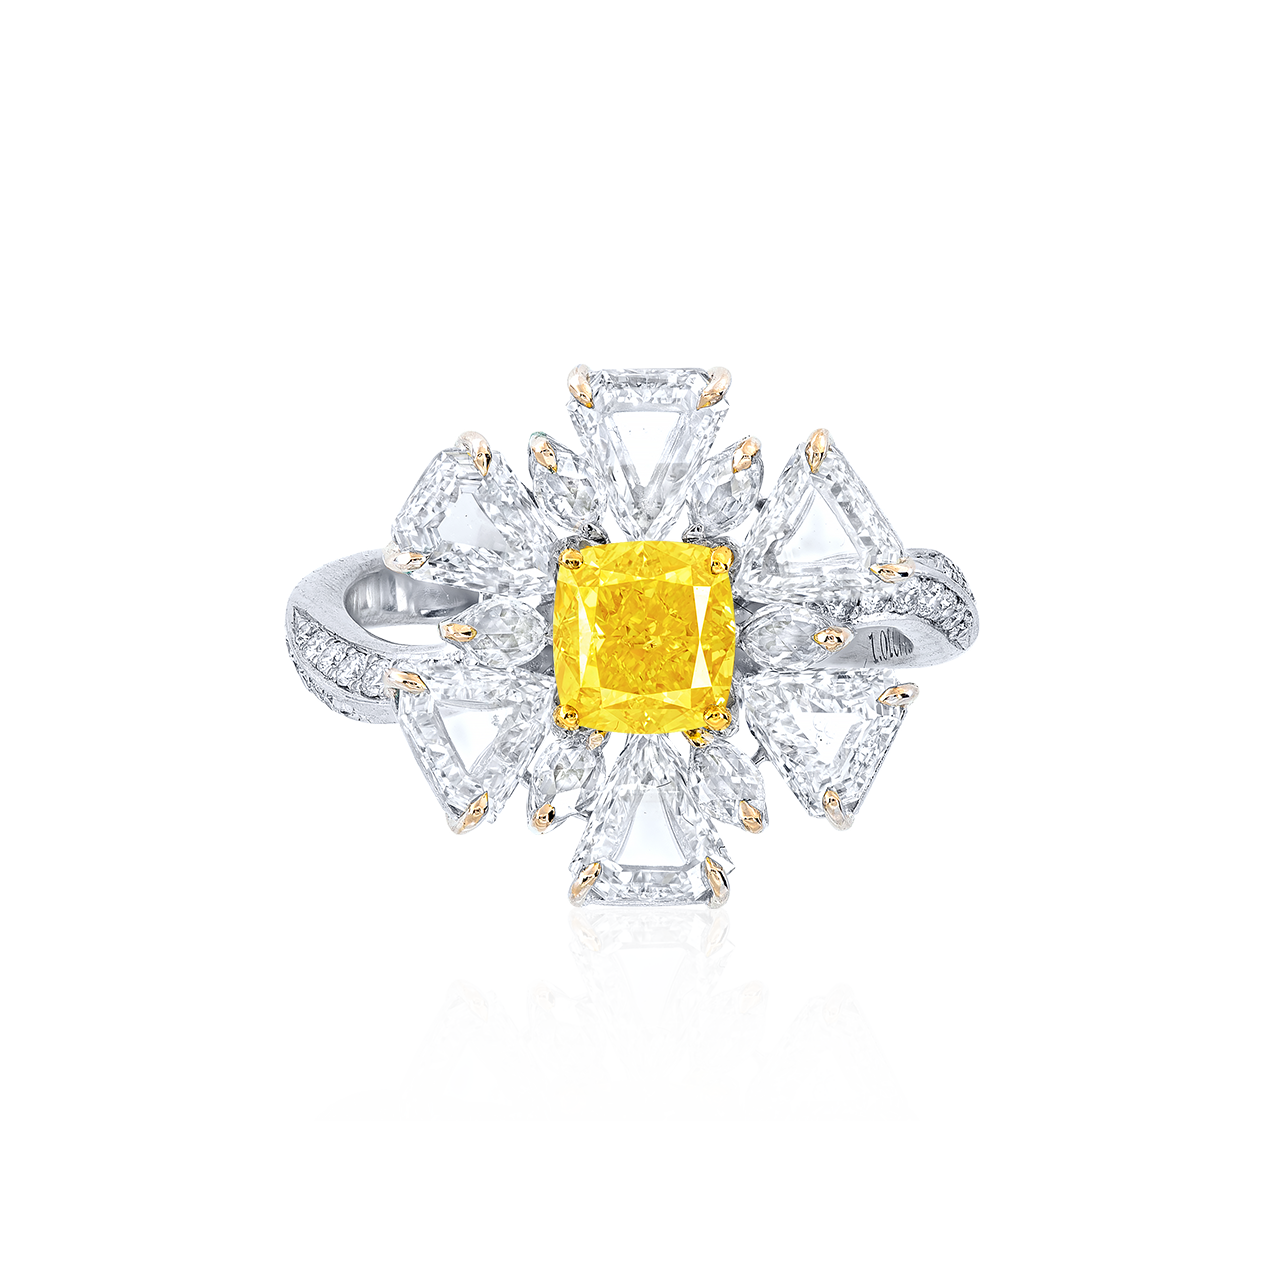 GIA 1.01克拉 艷彩黃鑽戒
Fancy Vivid Yellow Colored
and Diamond Ring